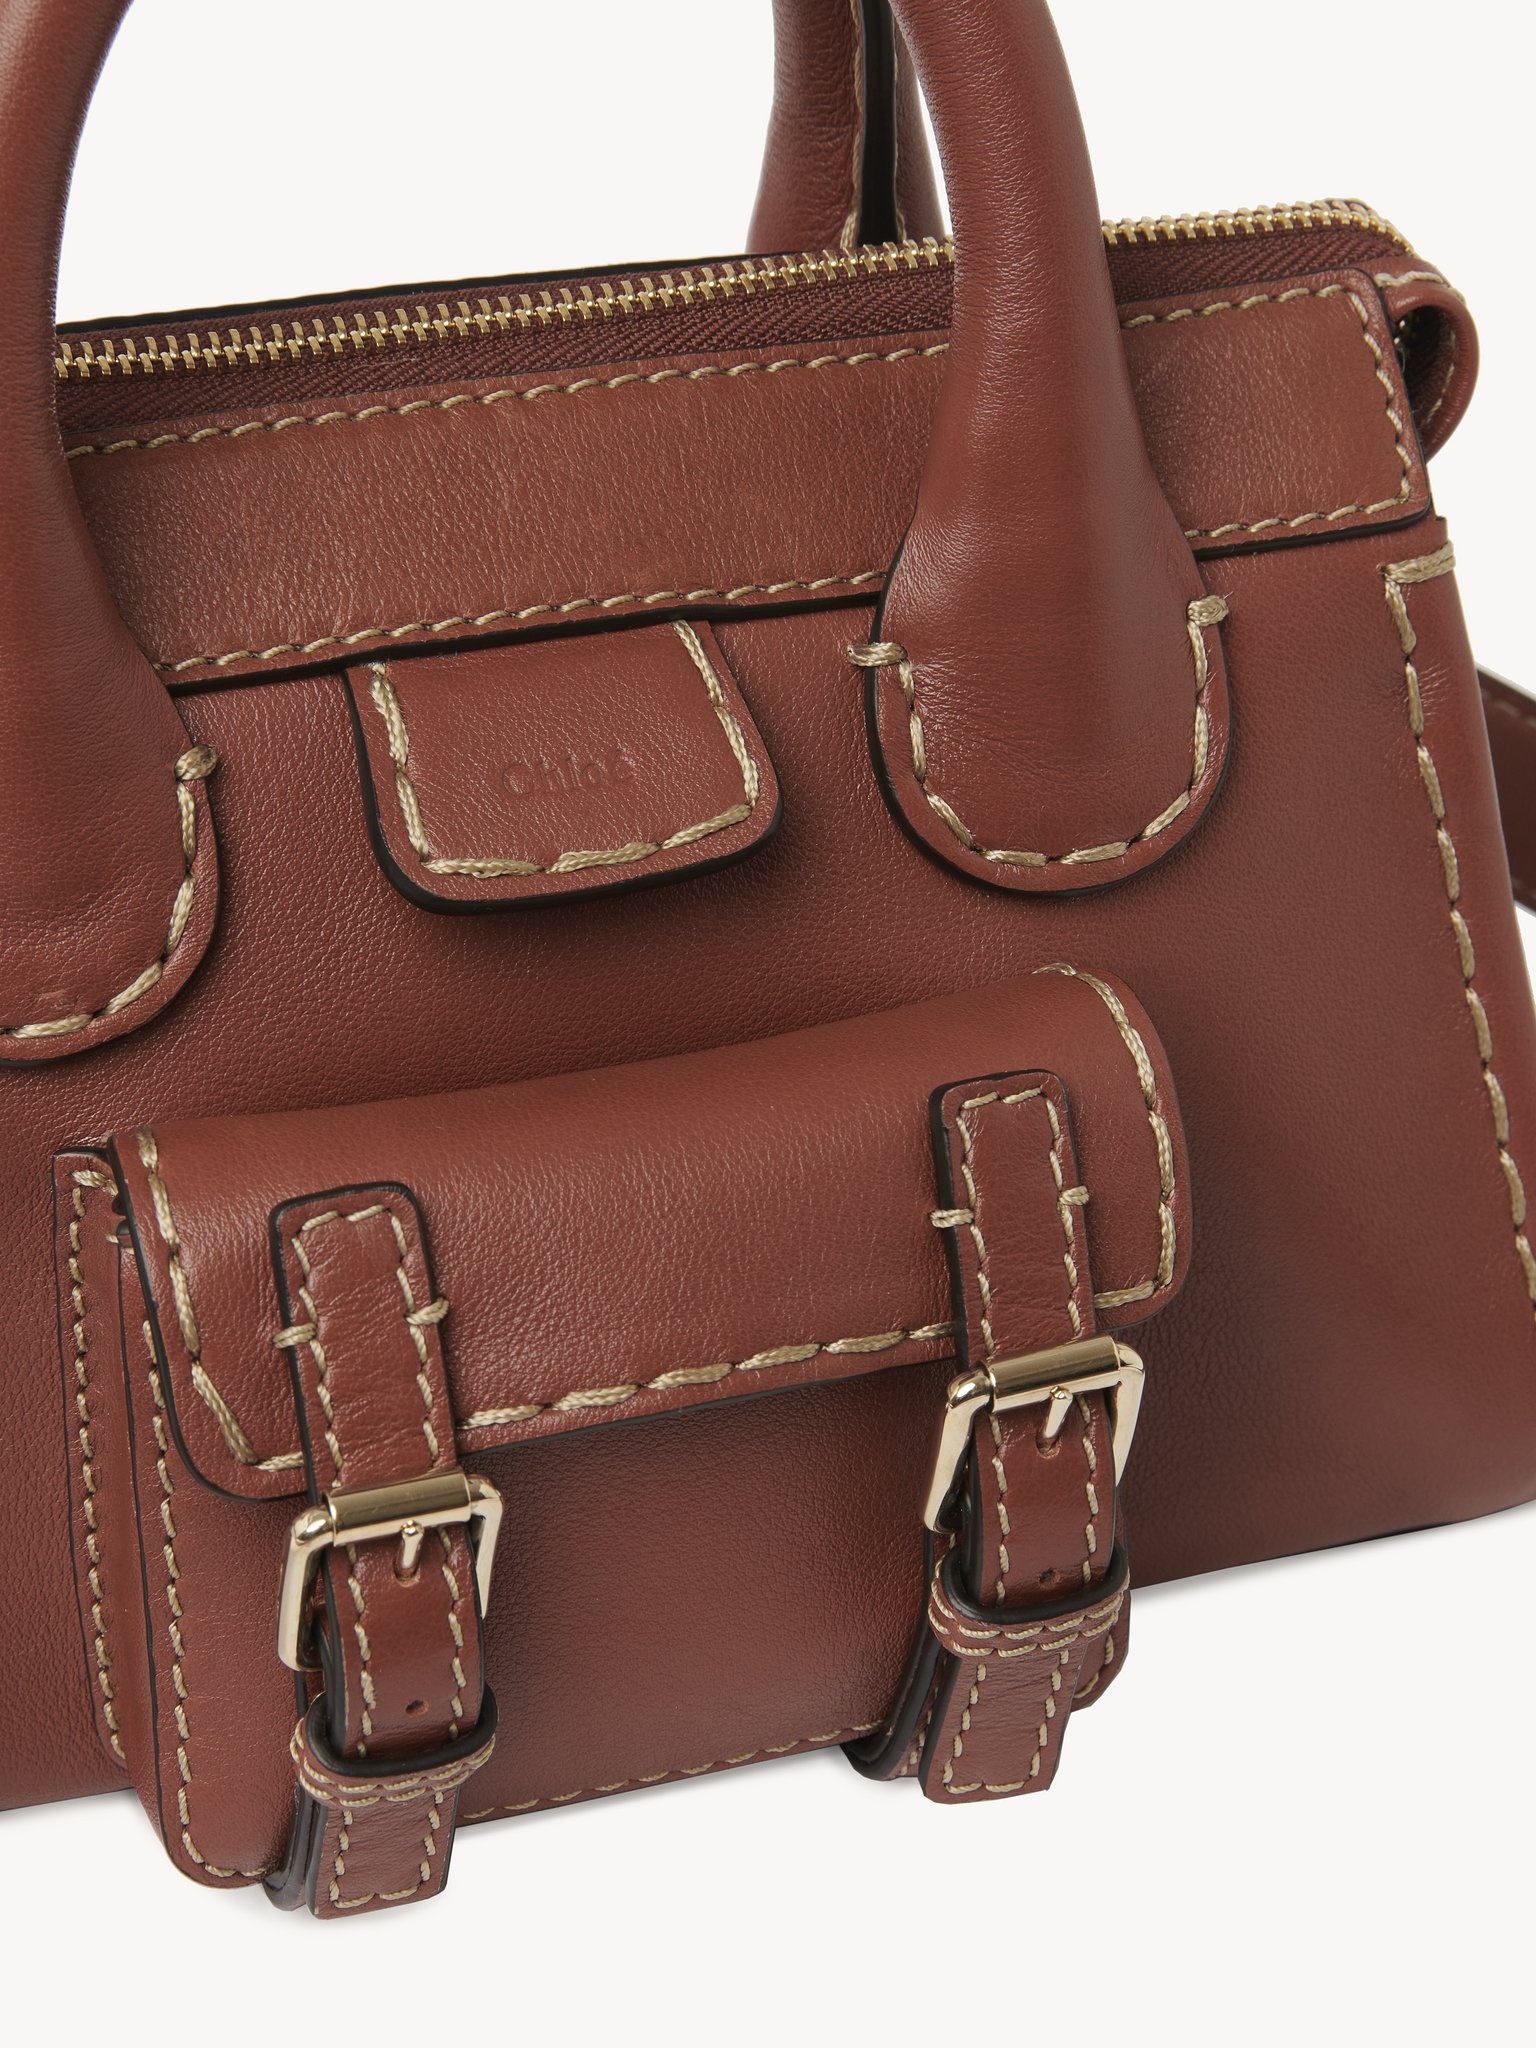 Chloé - Edith Sepia Brown Leather Phone Pouch